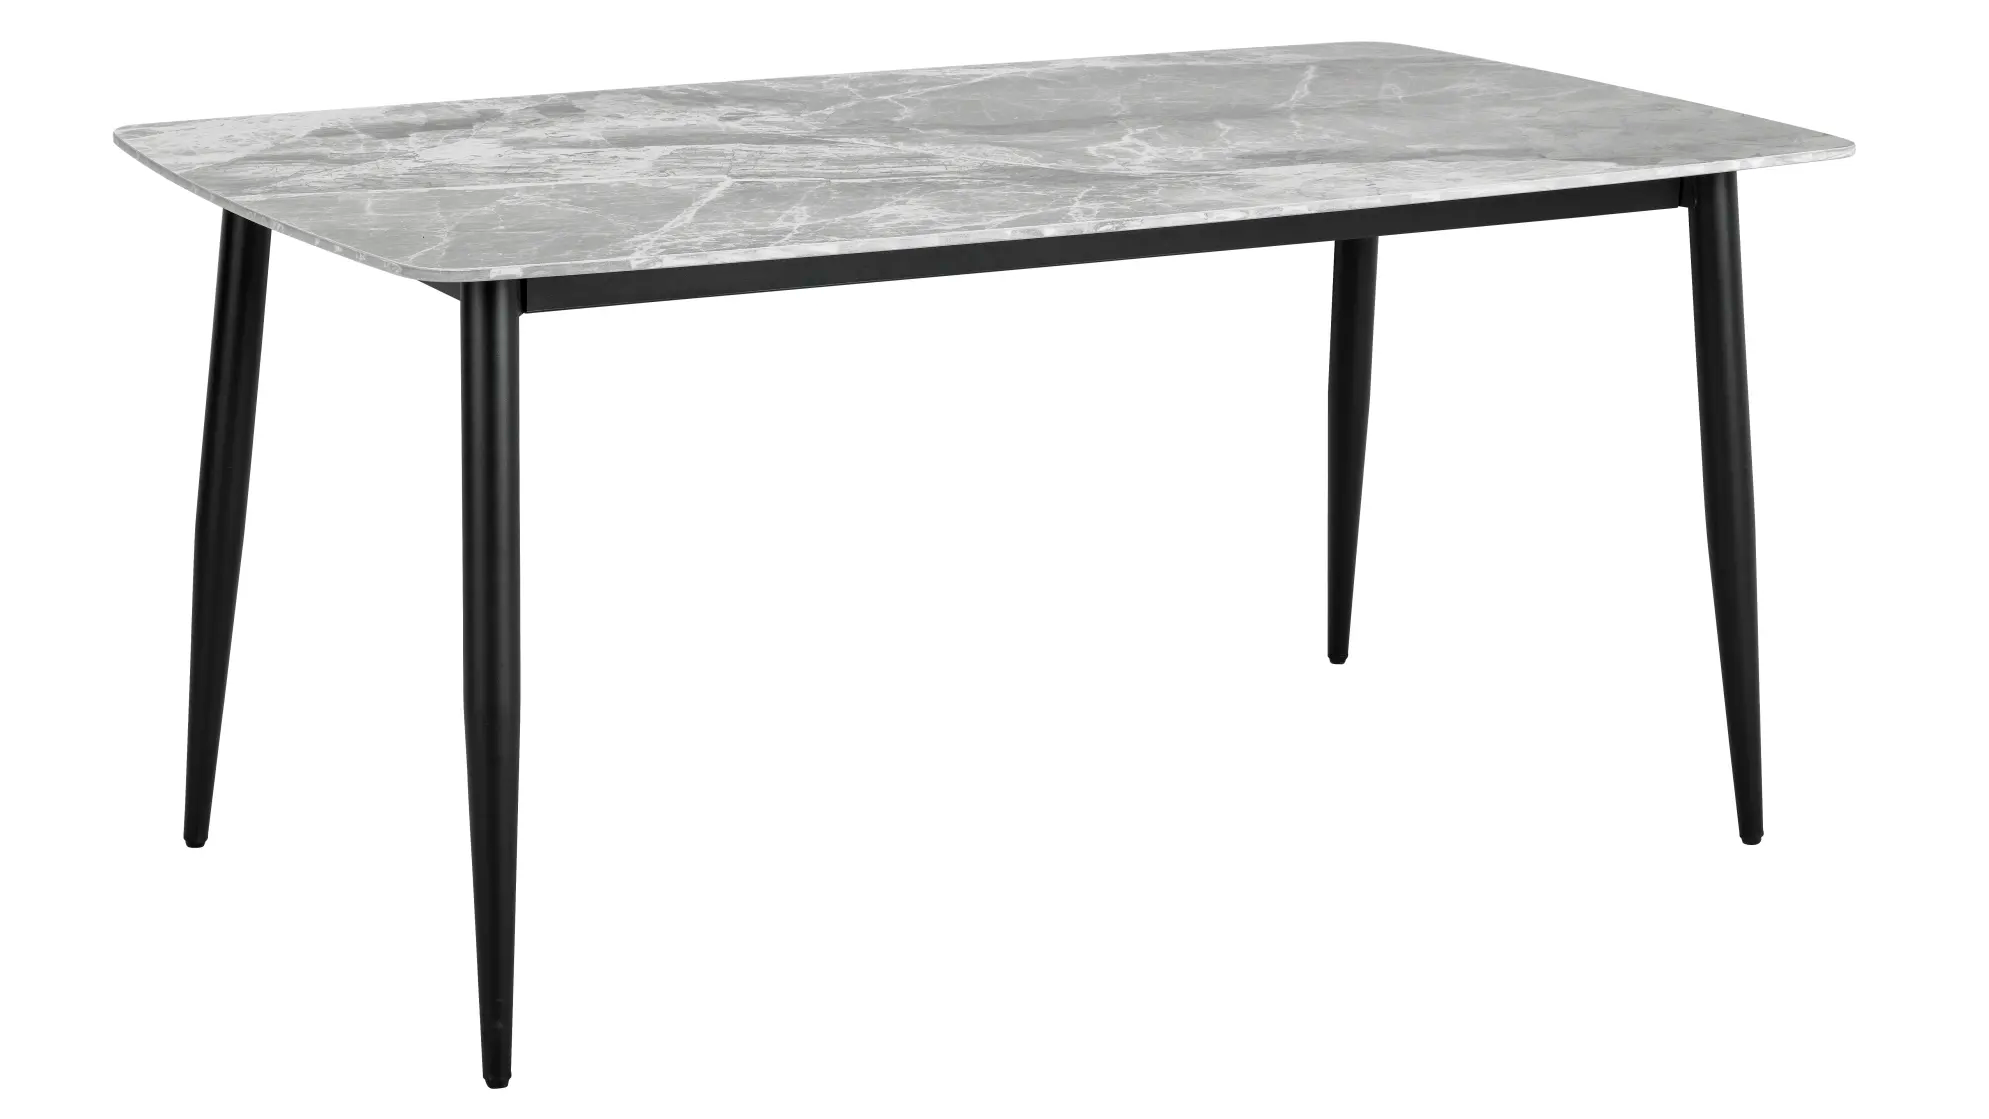 A faux marble tabletop with black legs to support.